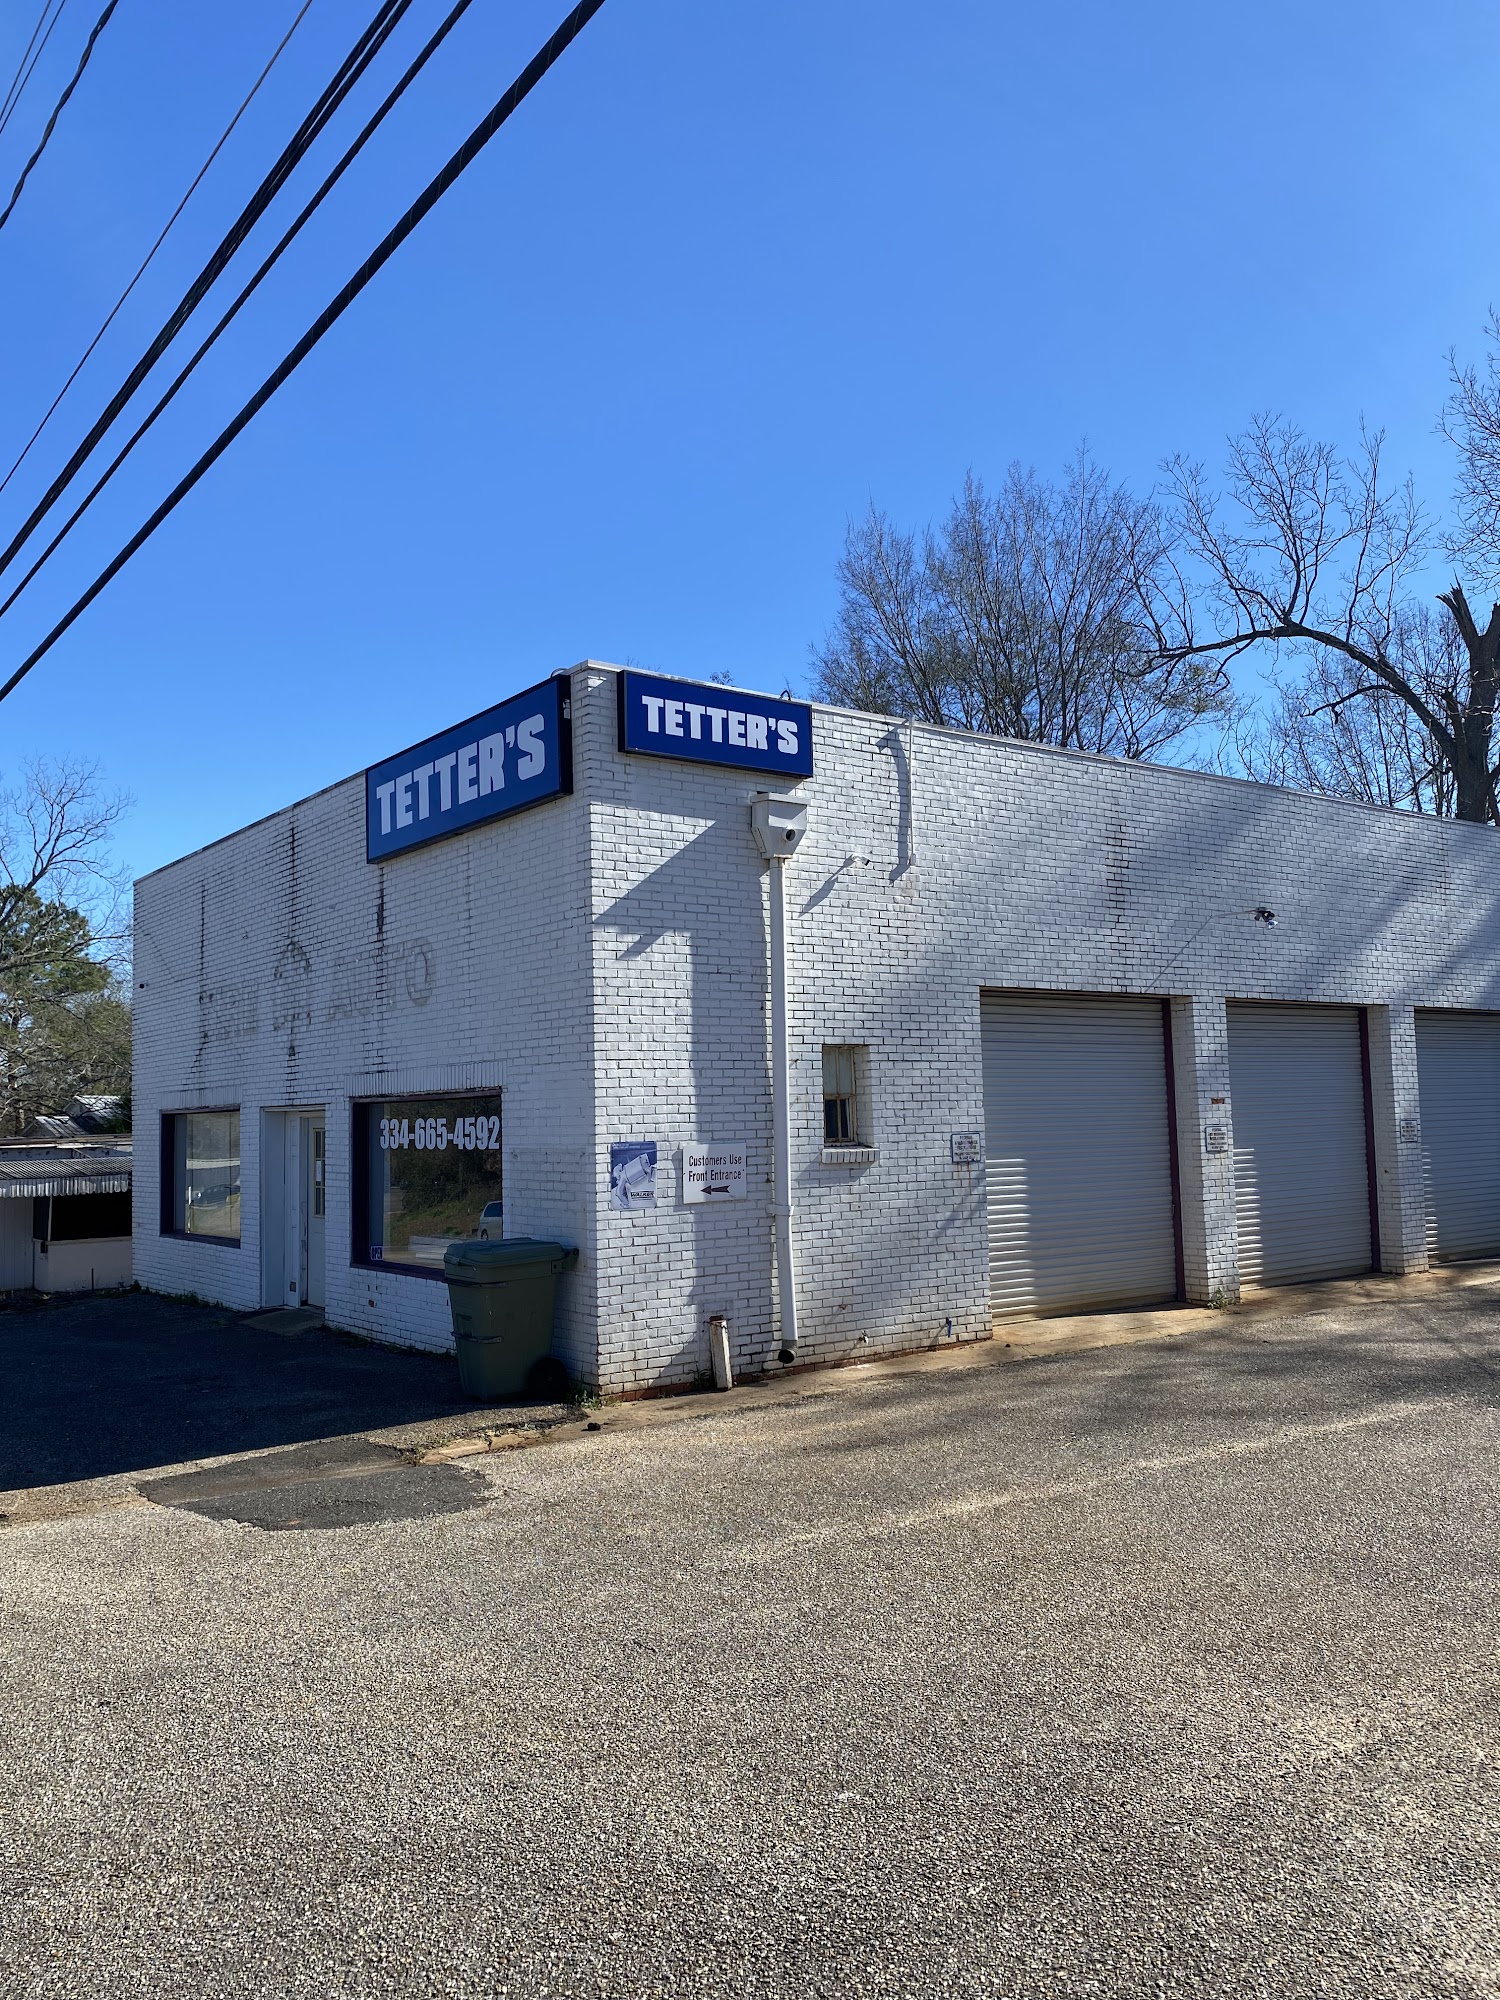 Tetters Heating Cooling 806 E Commerce St, Greenville Alabama 36037